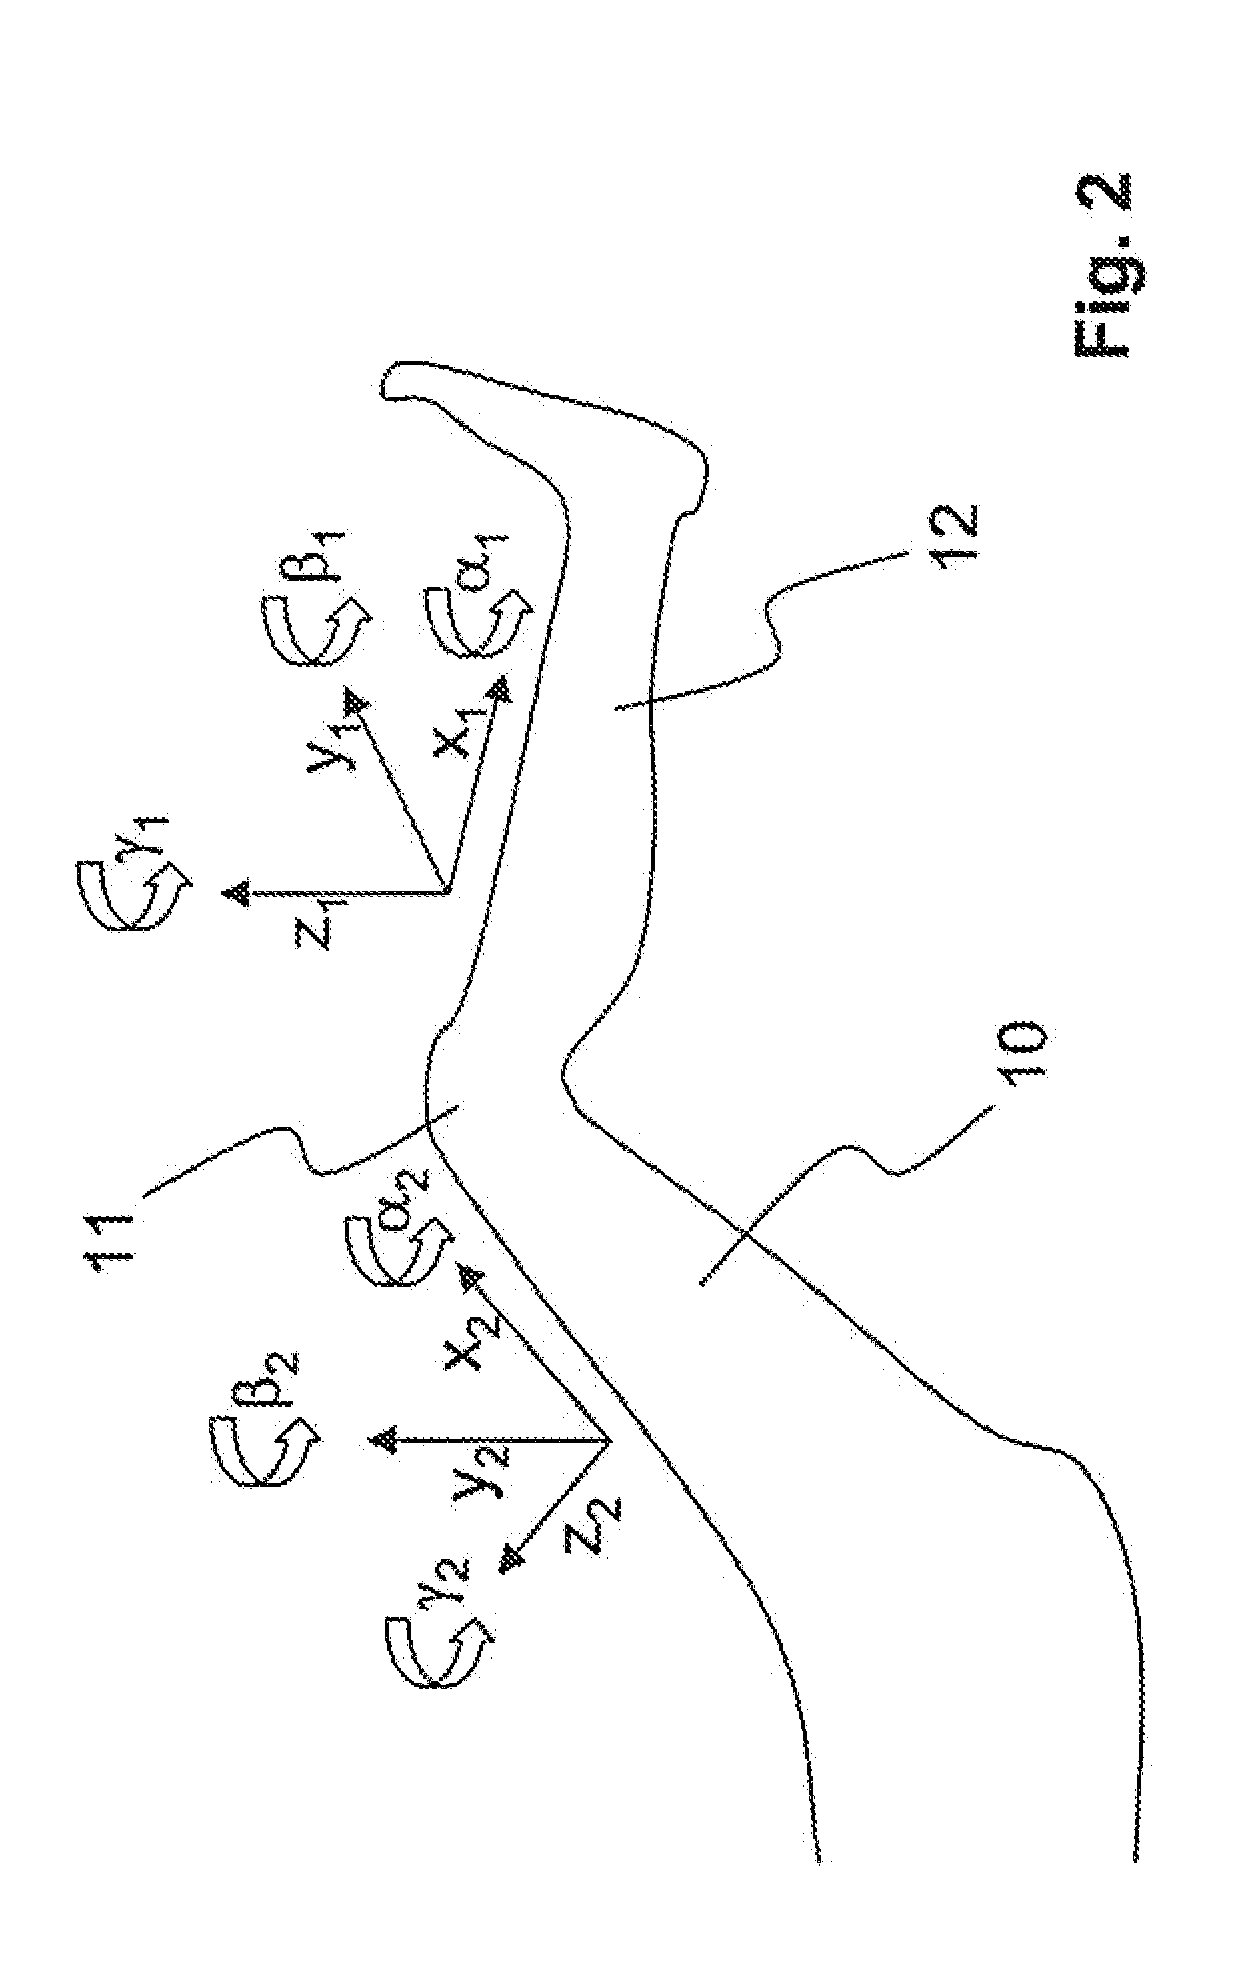 Device for determining the stability of a knee joint